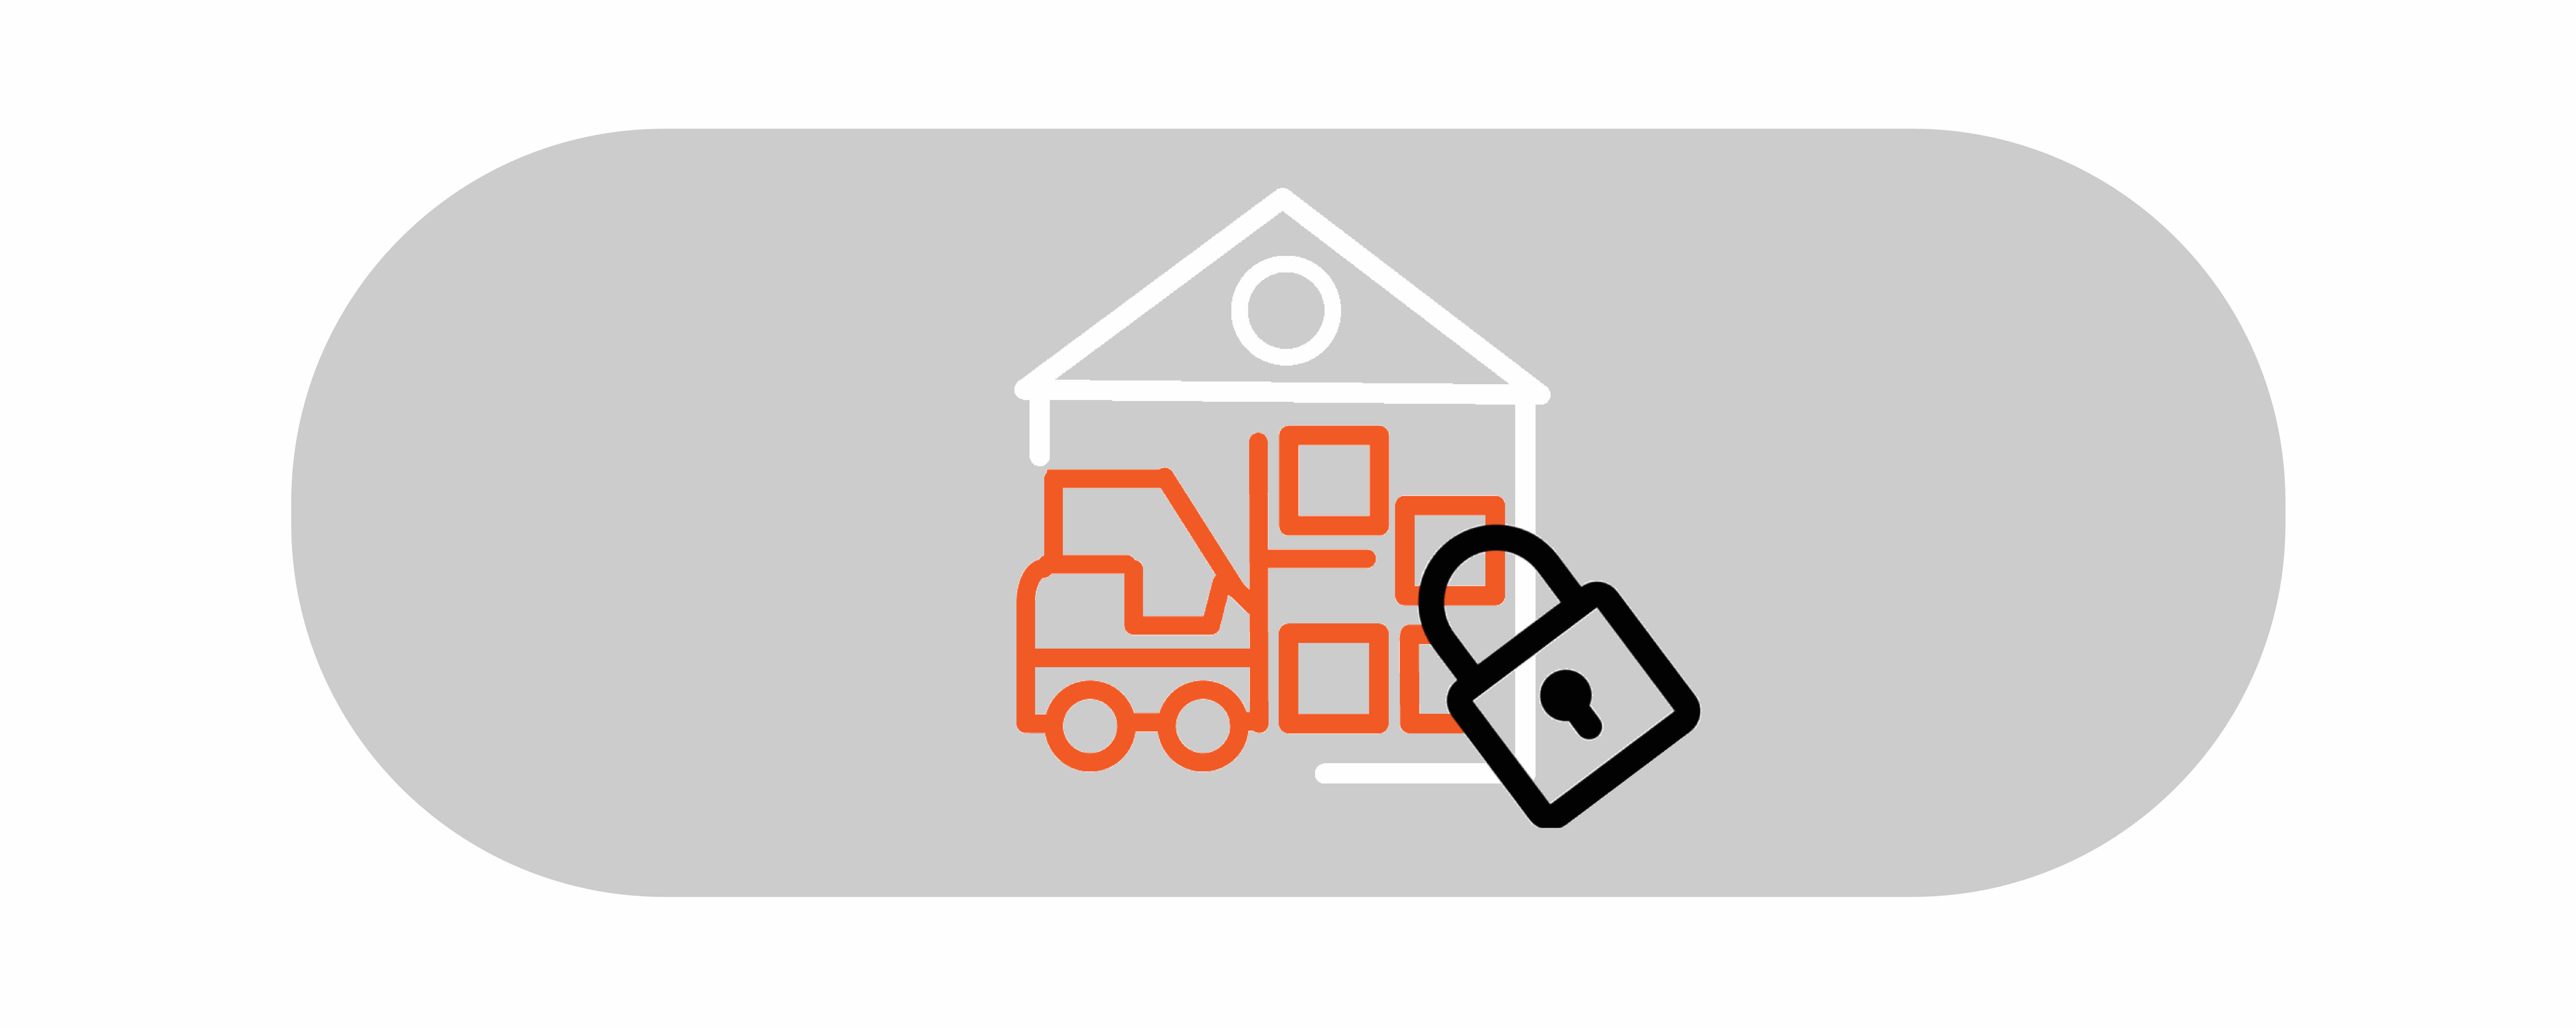 Vector art of a forklift placing boxes neatly into a warehouse space, there is a padlock in the foreground